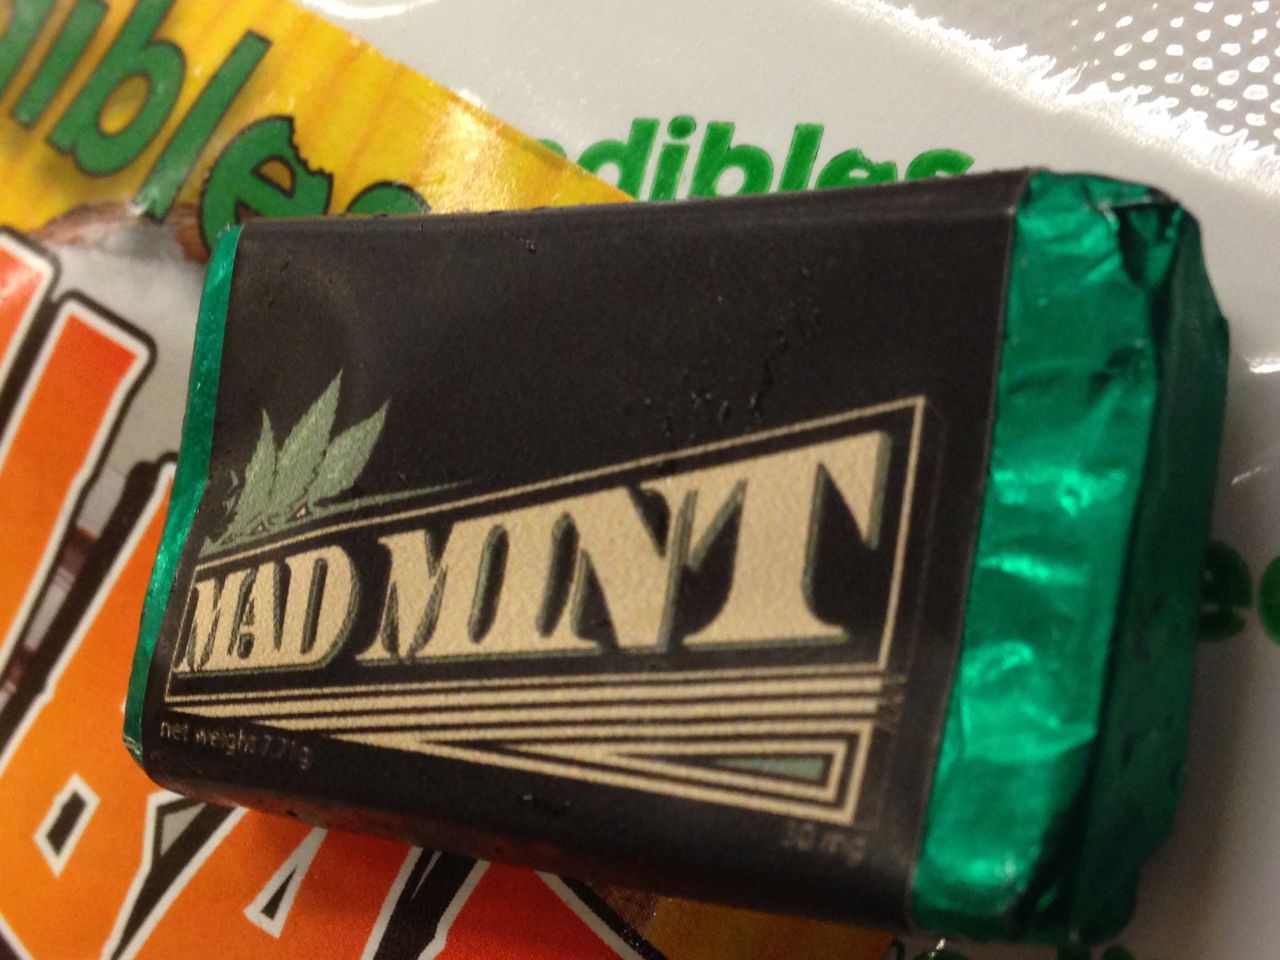 30 mg THC in this 'Mad Mint' candy. It's about the size of one Hershey mini candy bars. Each little bar has 3 doses of marijuana.